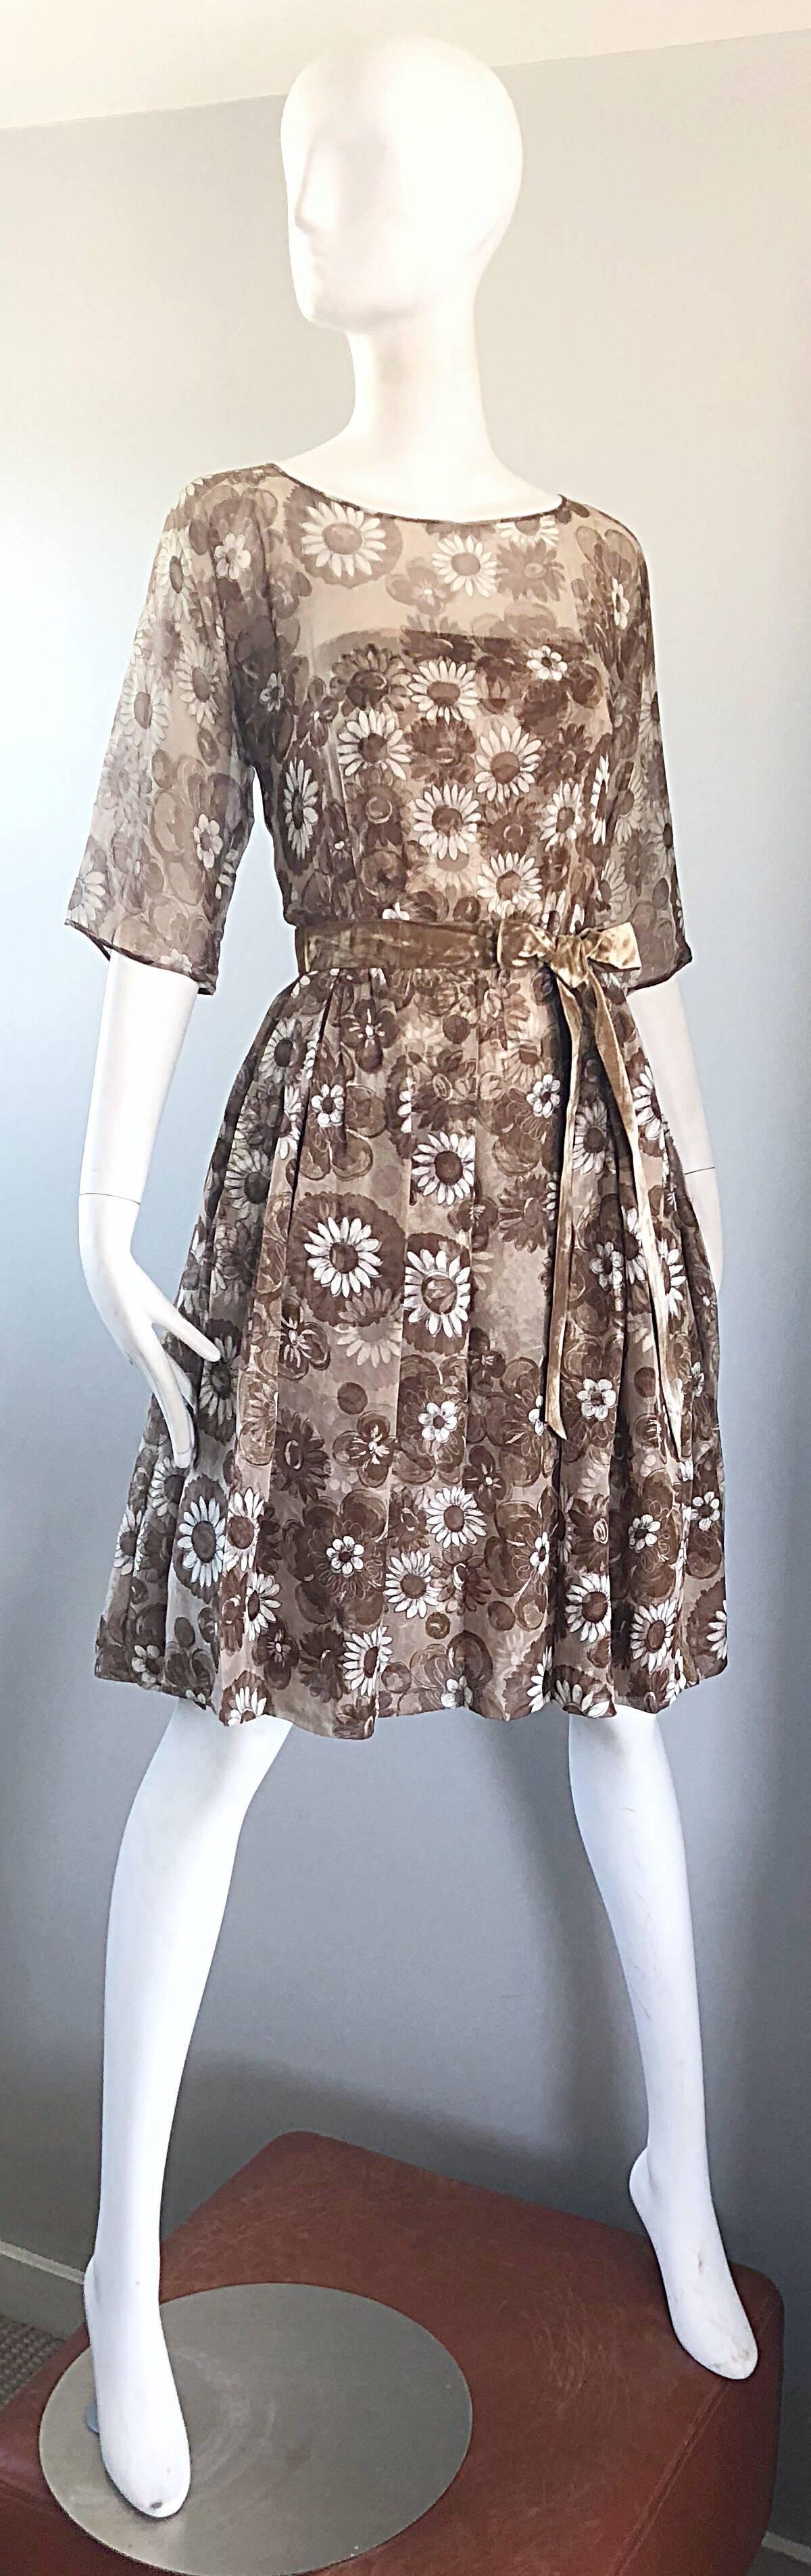 Gorgeous 1950s Saks 5th Avenue Demi Couture Silk Chiffon Beige Vintage 50s Dress In Excellent Condition For Sale In San Diego, CA